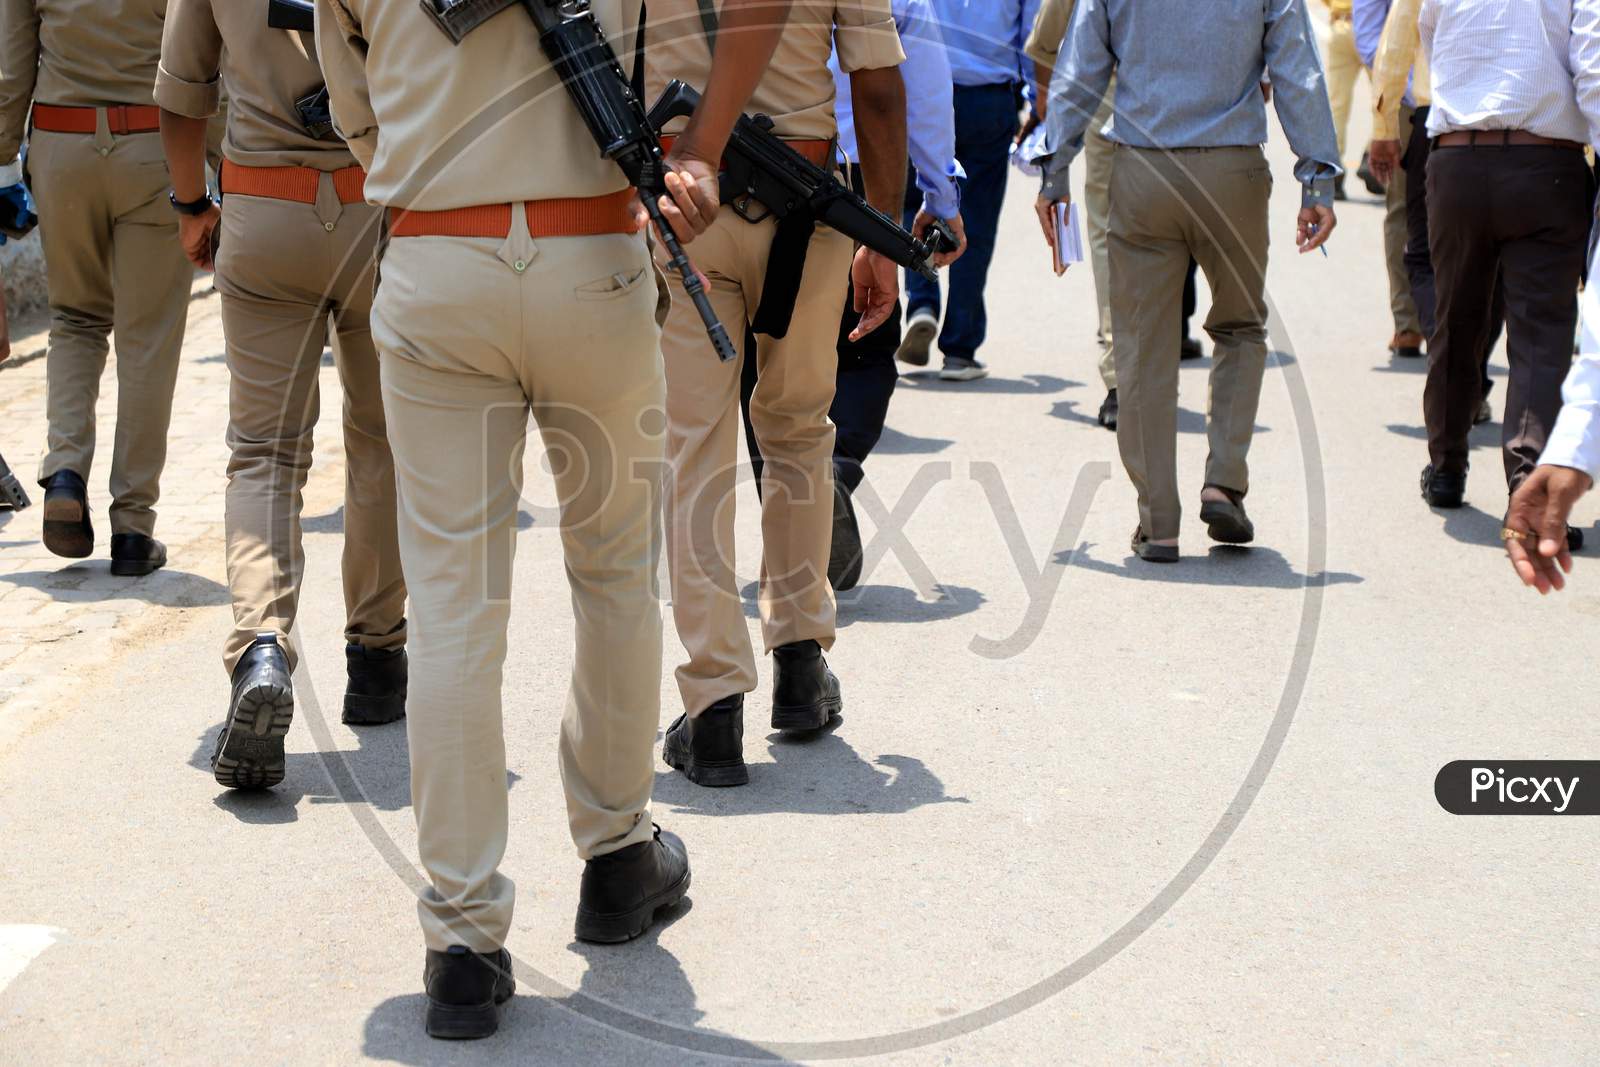 Policeman  And Administrative Officers Patrol In a Hot Spot Area During Nationwide Lockdown Amidst Of Coronavirus or COVID-19 Outbreak in Prayagraj,April 25  2020